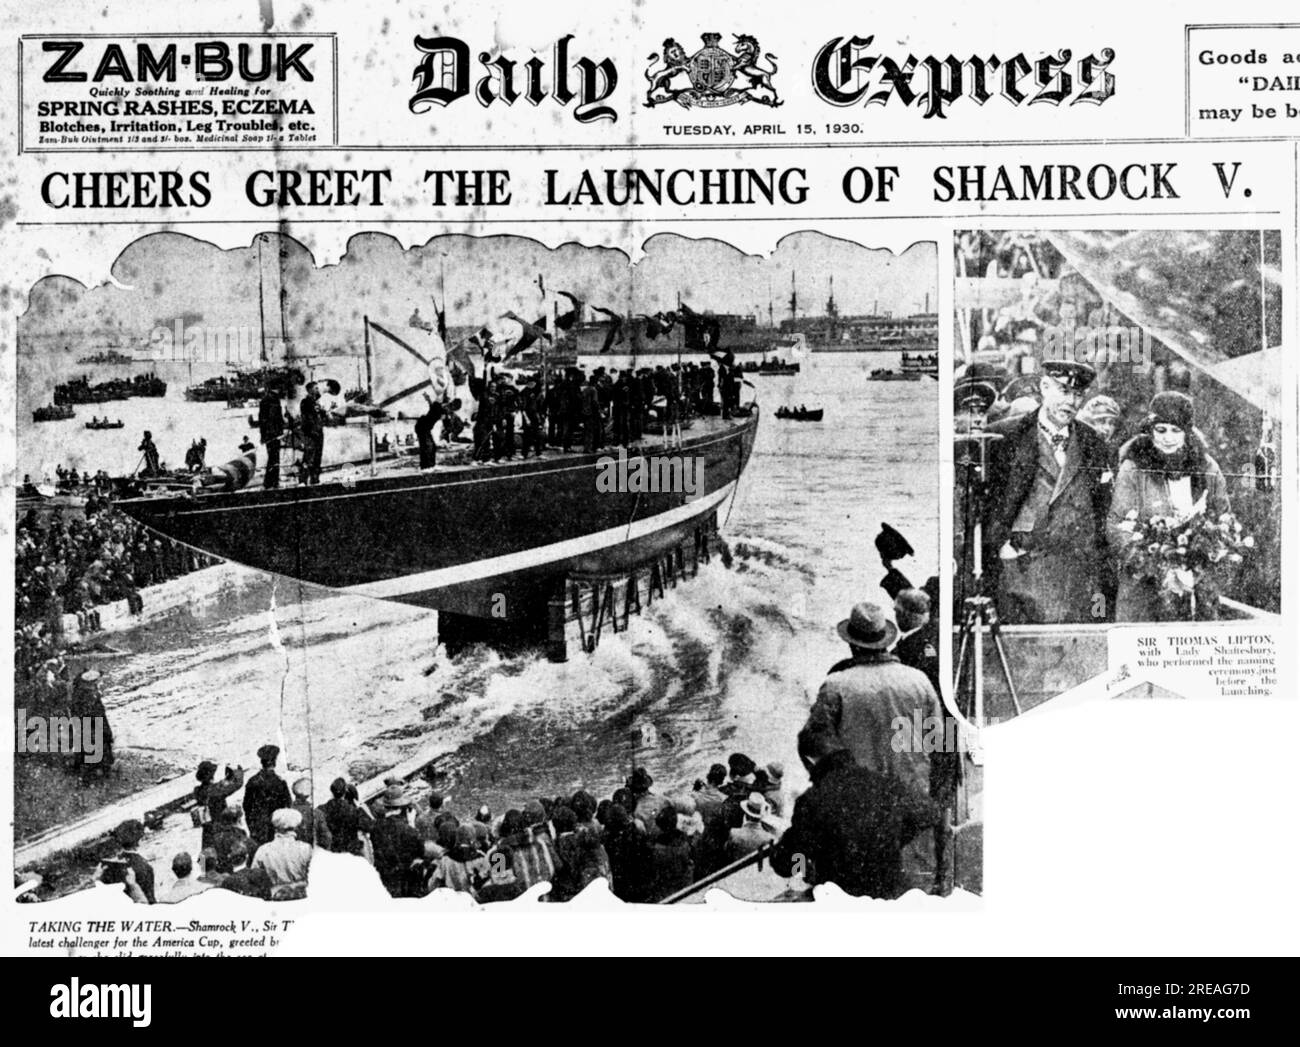 AJAXNETPHOTO. 15TH APRIL, 1930. GOSPORT, ENGLAND. - AMERICA'S CUP CHALLENGER LAUNCHED - FRONT PAGE OF THE DAILY EXPRESS OF 15TH APRIL, 1930, SHOWS THE J CLASS YACHT SHAMROCK V BEING LAUNCHED FROM THE BUILDERS YARD, CAMPER & NICHOLSONS. INSET PIC SHOWS OWNER SIR THOMAS LIPTON WITH LADY SHAFTESBURY WHO PERFORMED THE NAMING CEREMONY.   PHOTO: JONATHAN EASTLAND/AJAX.  REF: 19301504 Stock Photo